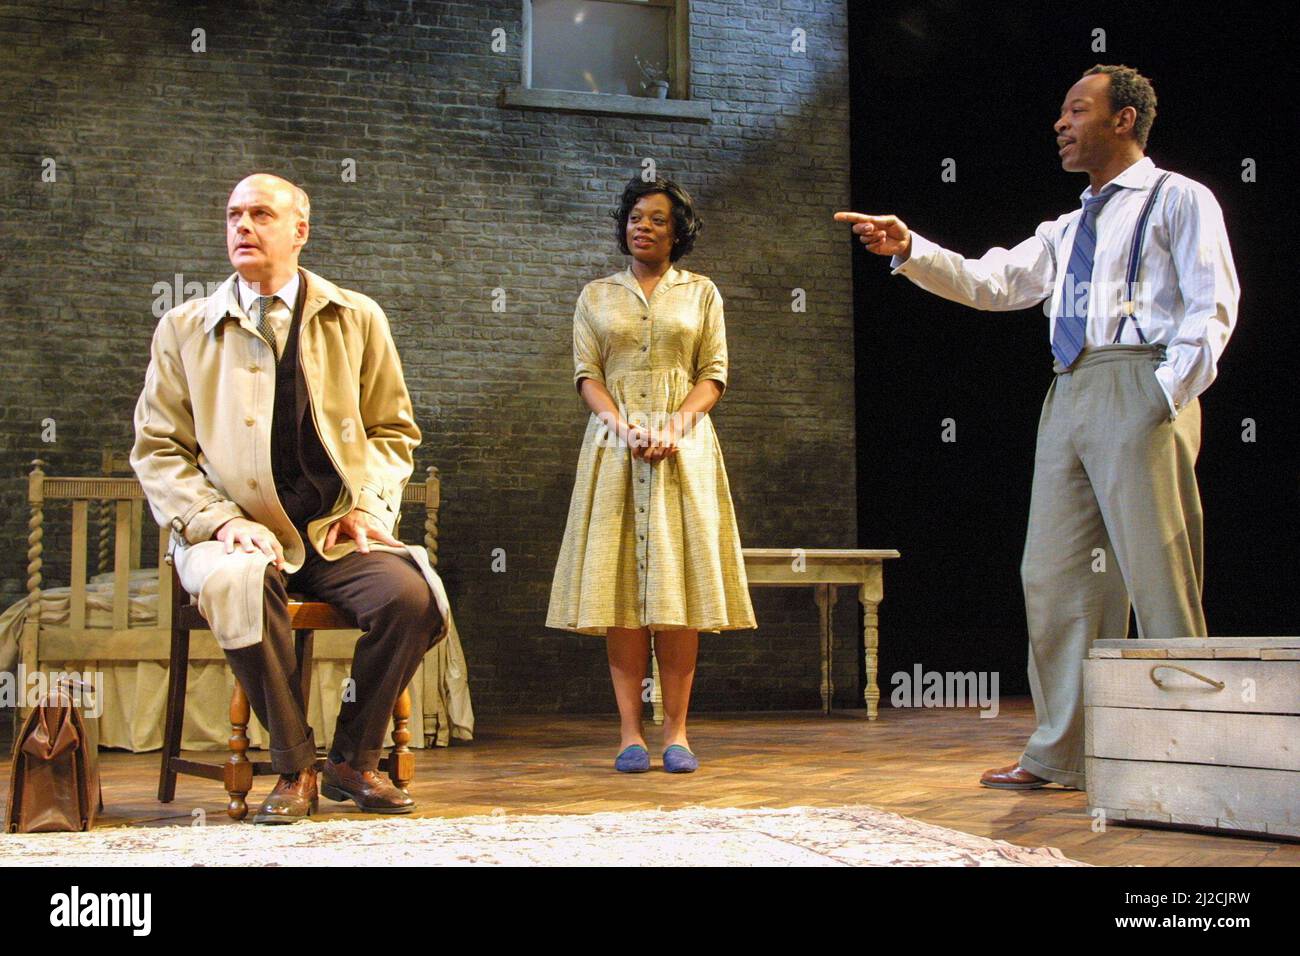 l-r: William Chubb (Karl Lindner), Cecilia Noble (Ruth Younger), Lennie James (Walter Lee Younger) in A RAISIN IN THE SUN by Lorraine Hansberry at the Young Vic Theatre, London SE1  04/06/2001               design: Francis O’Connor  lighting: Tim Mitchell  director: David Lan Stock Photo